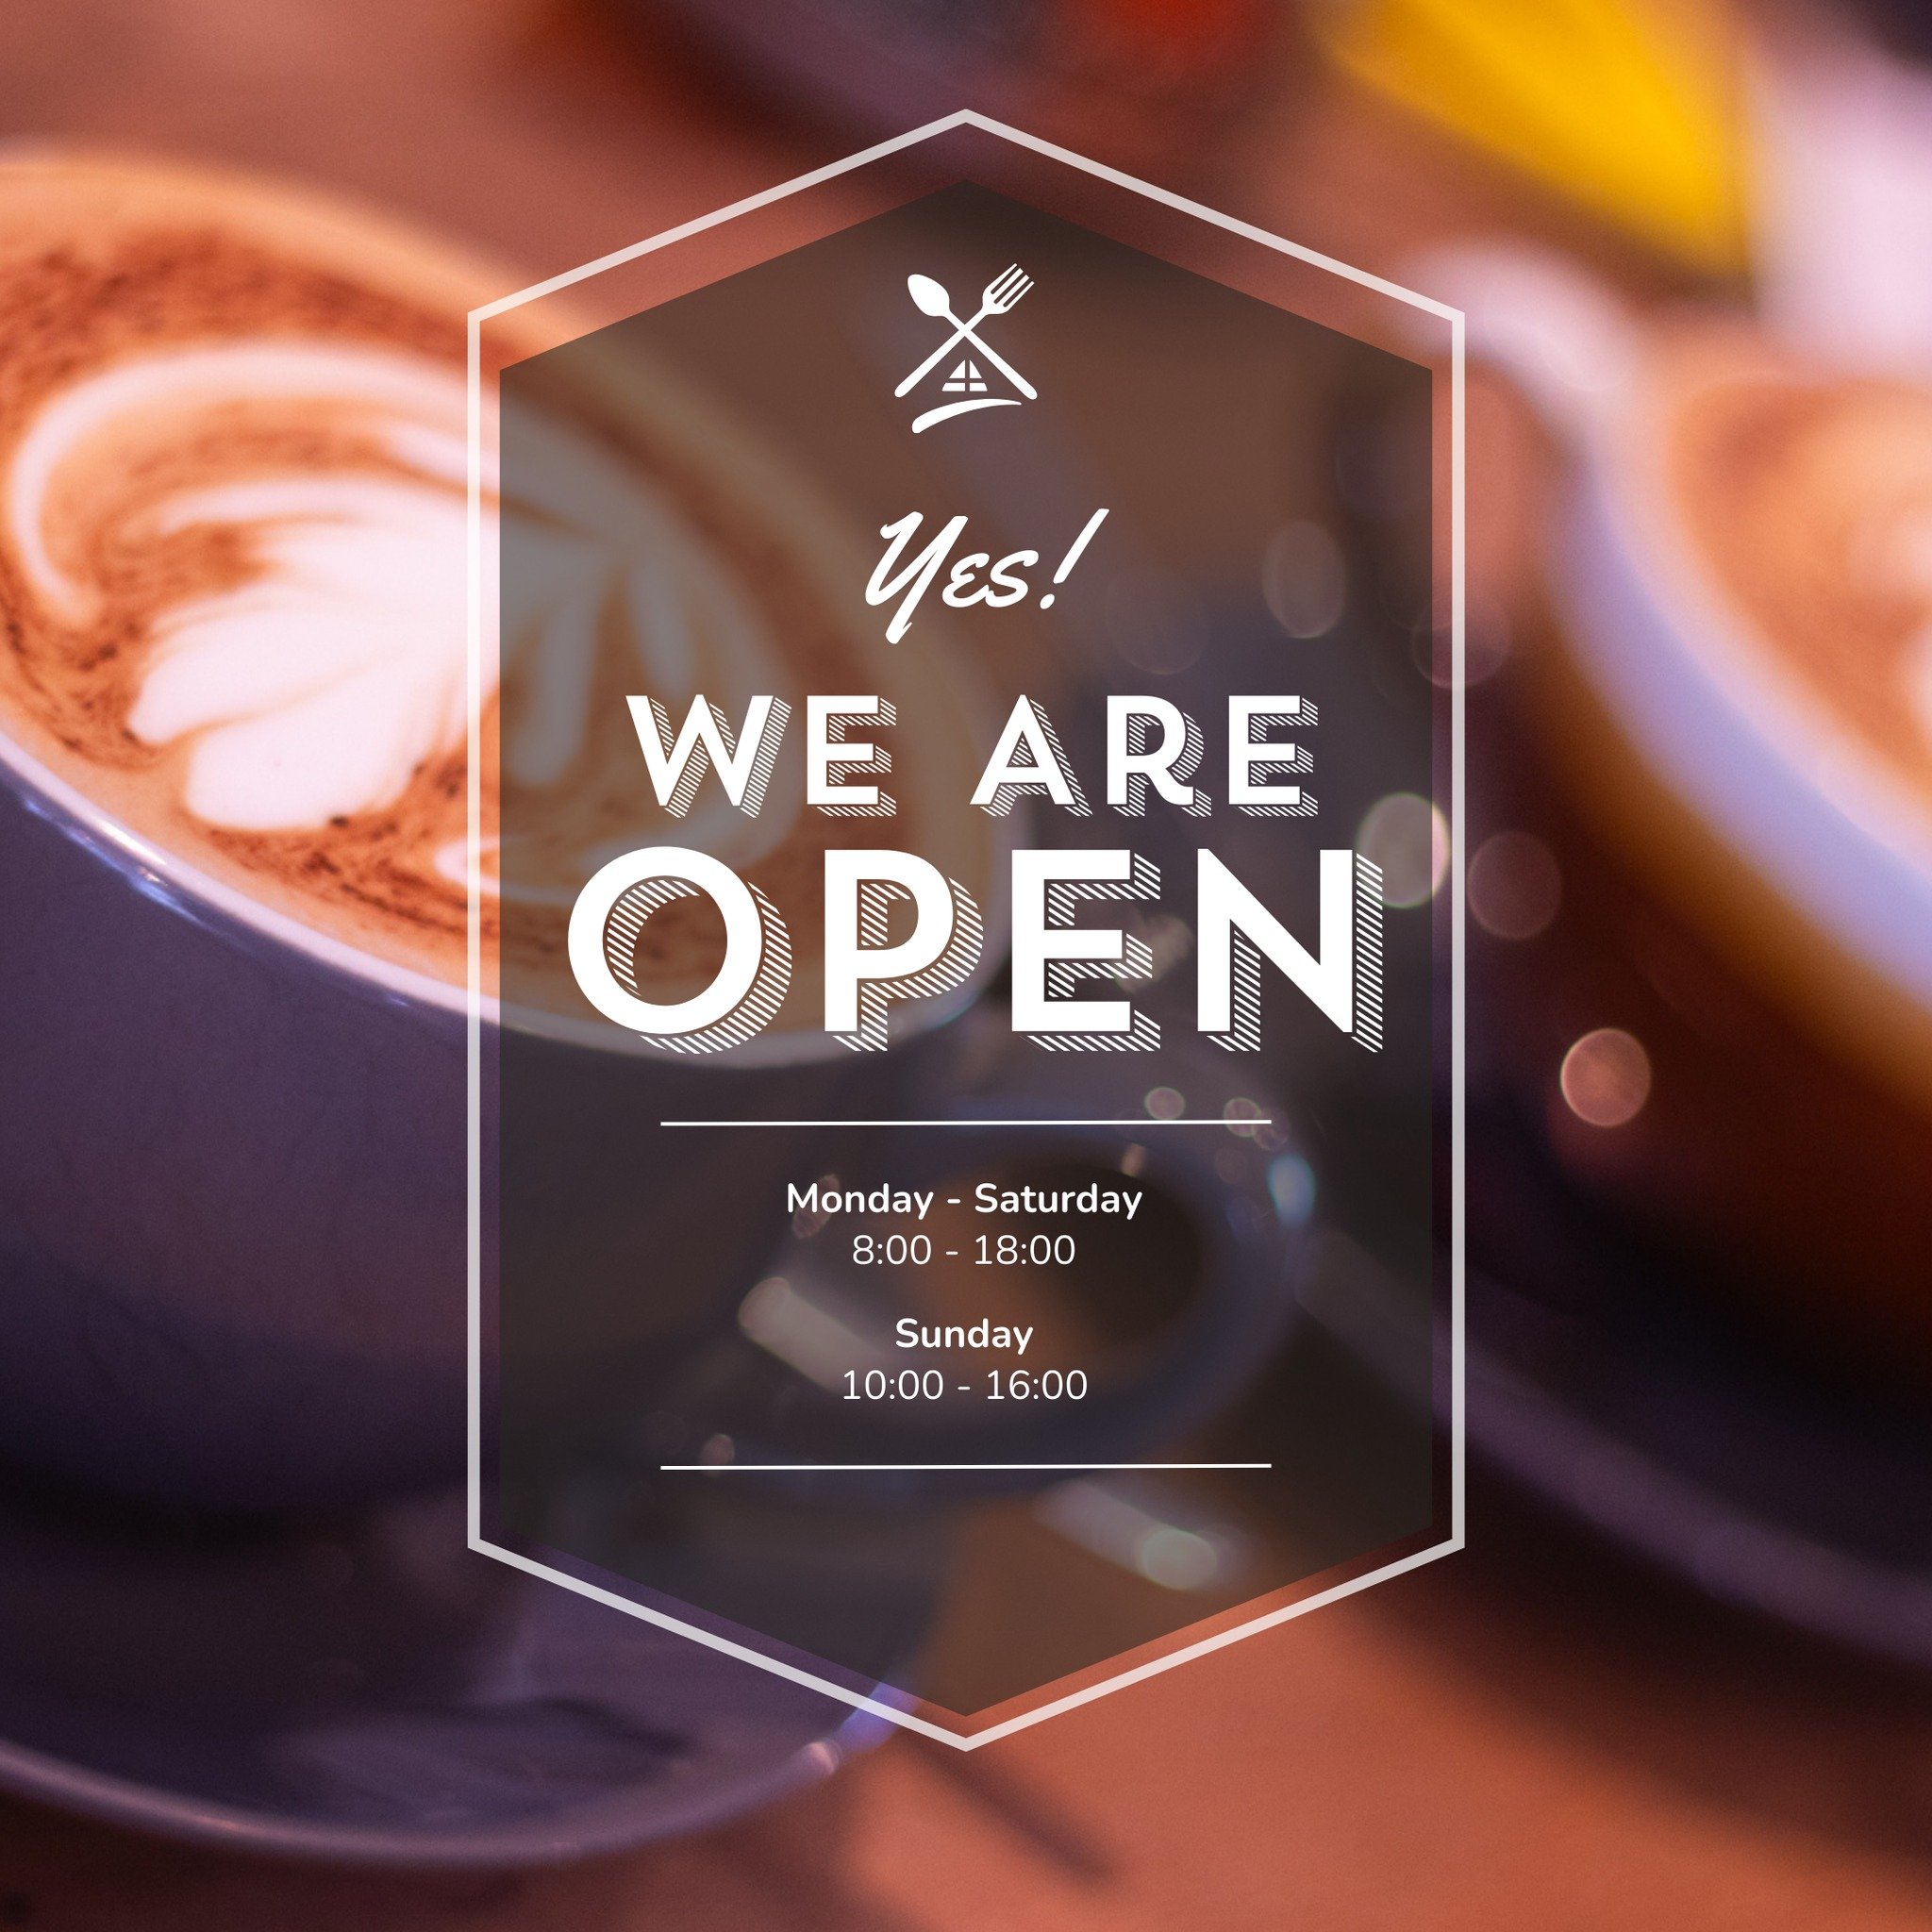 Hey there! Our cosy coffee shop is open every day to fuel your caffeine addiction ☕️. Join our great community of coffee lovers and enjoy our delicious brews! 🌟Come say hi!
#coffeetime #communitylove #bristol #coffeeshop